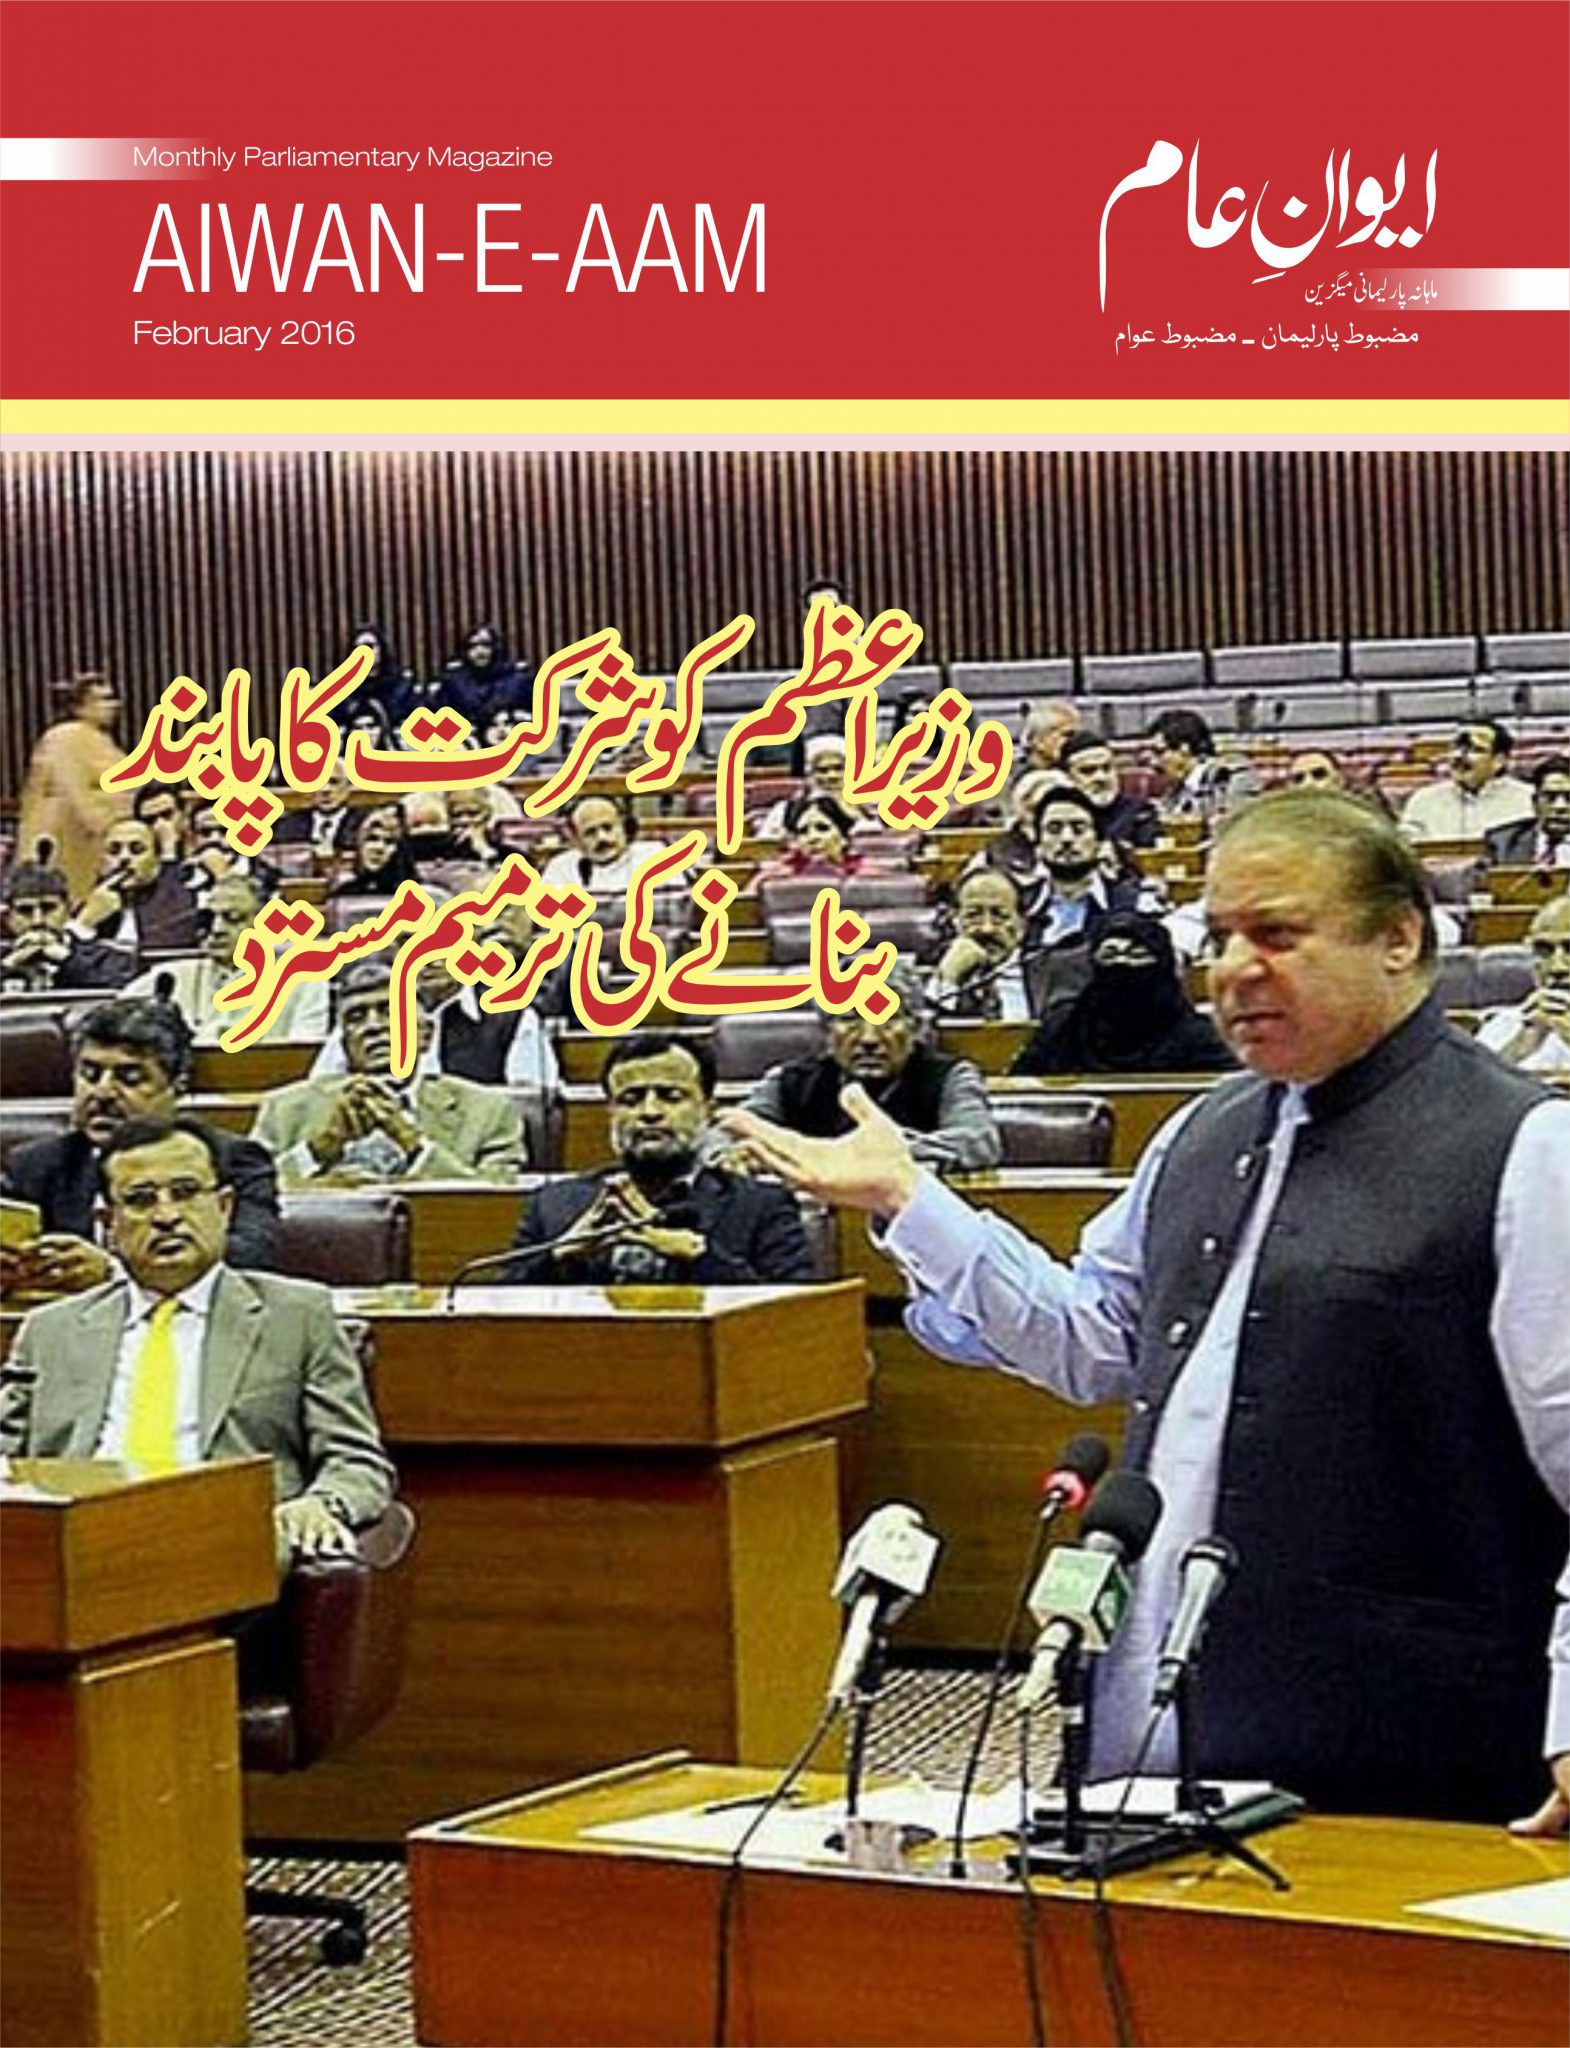 Monthly Magazine Aiwan-e-Aam – February 2016